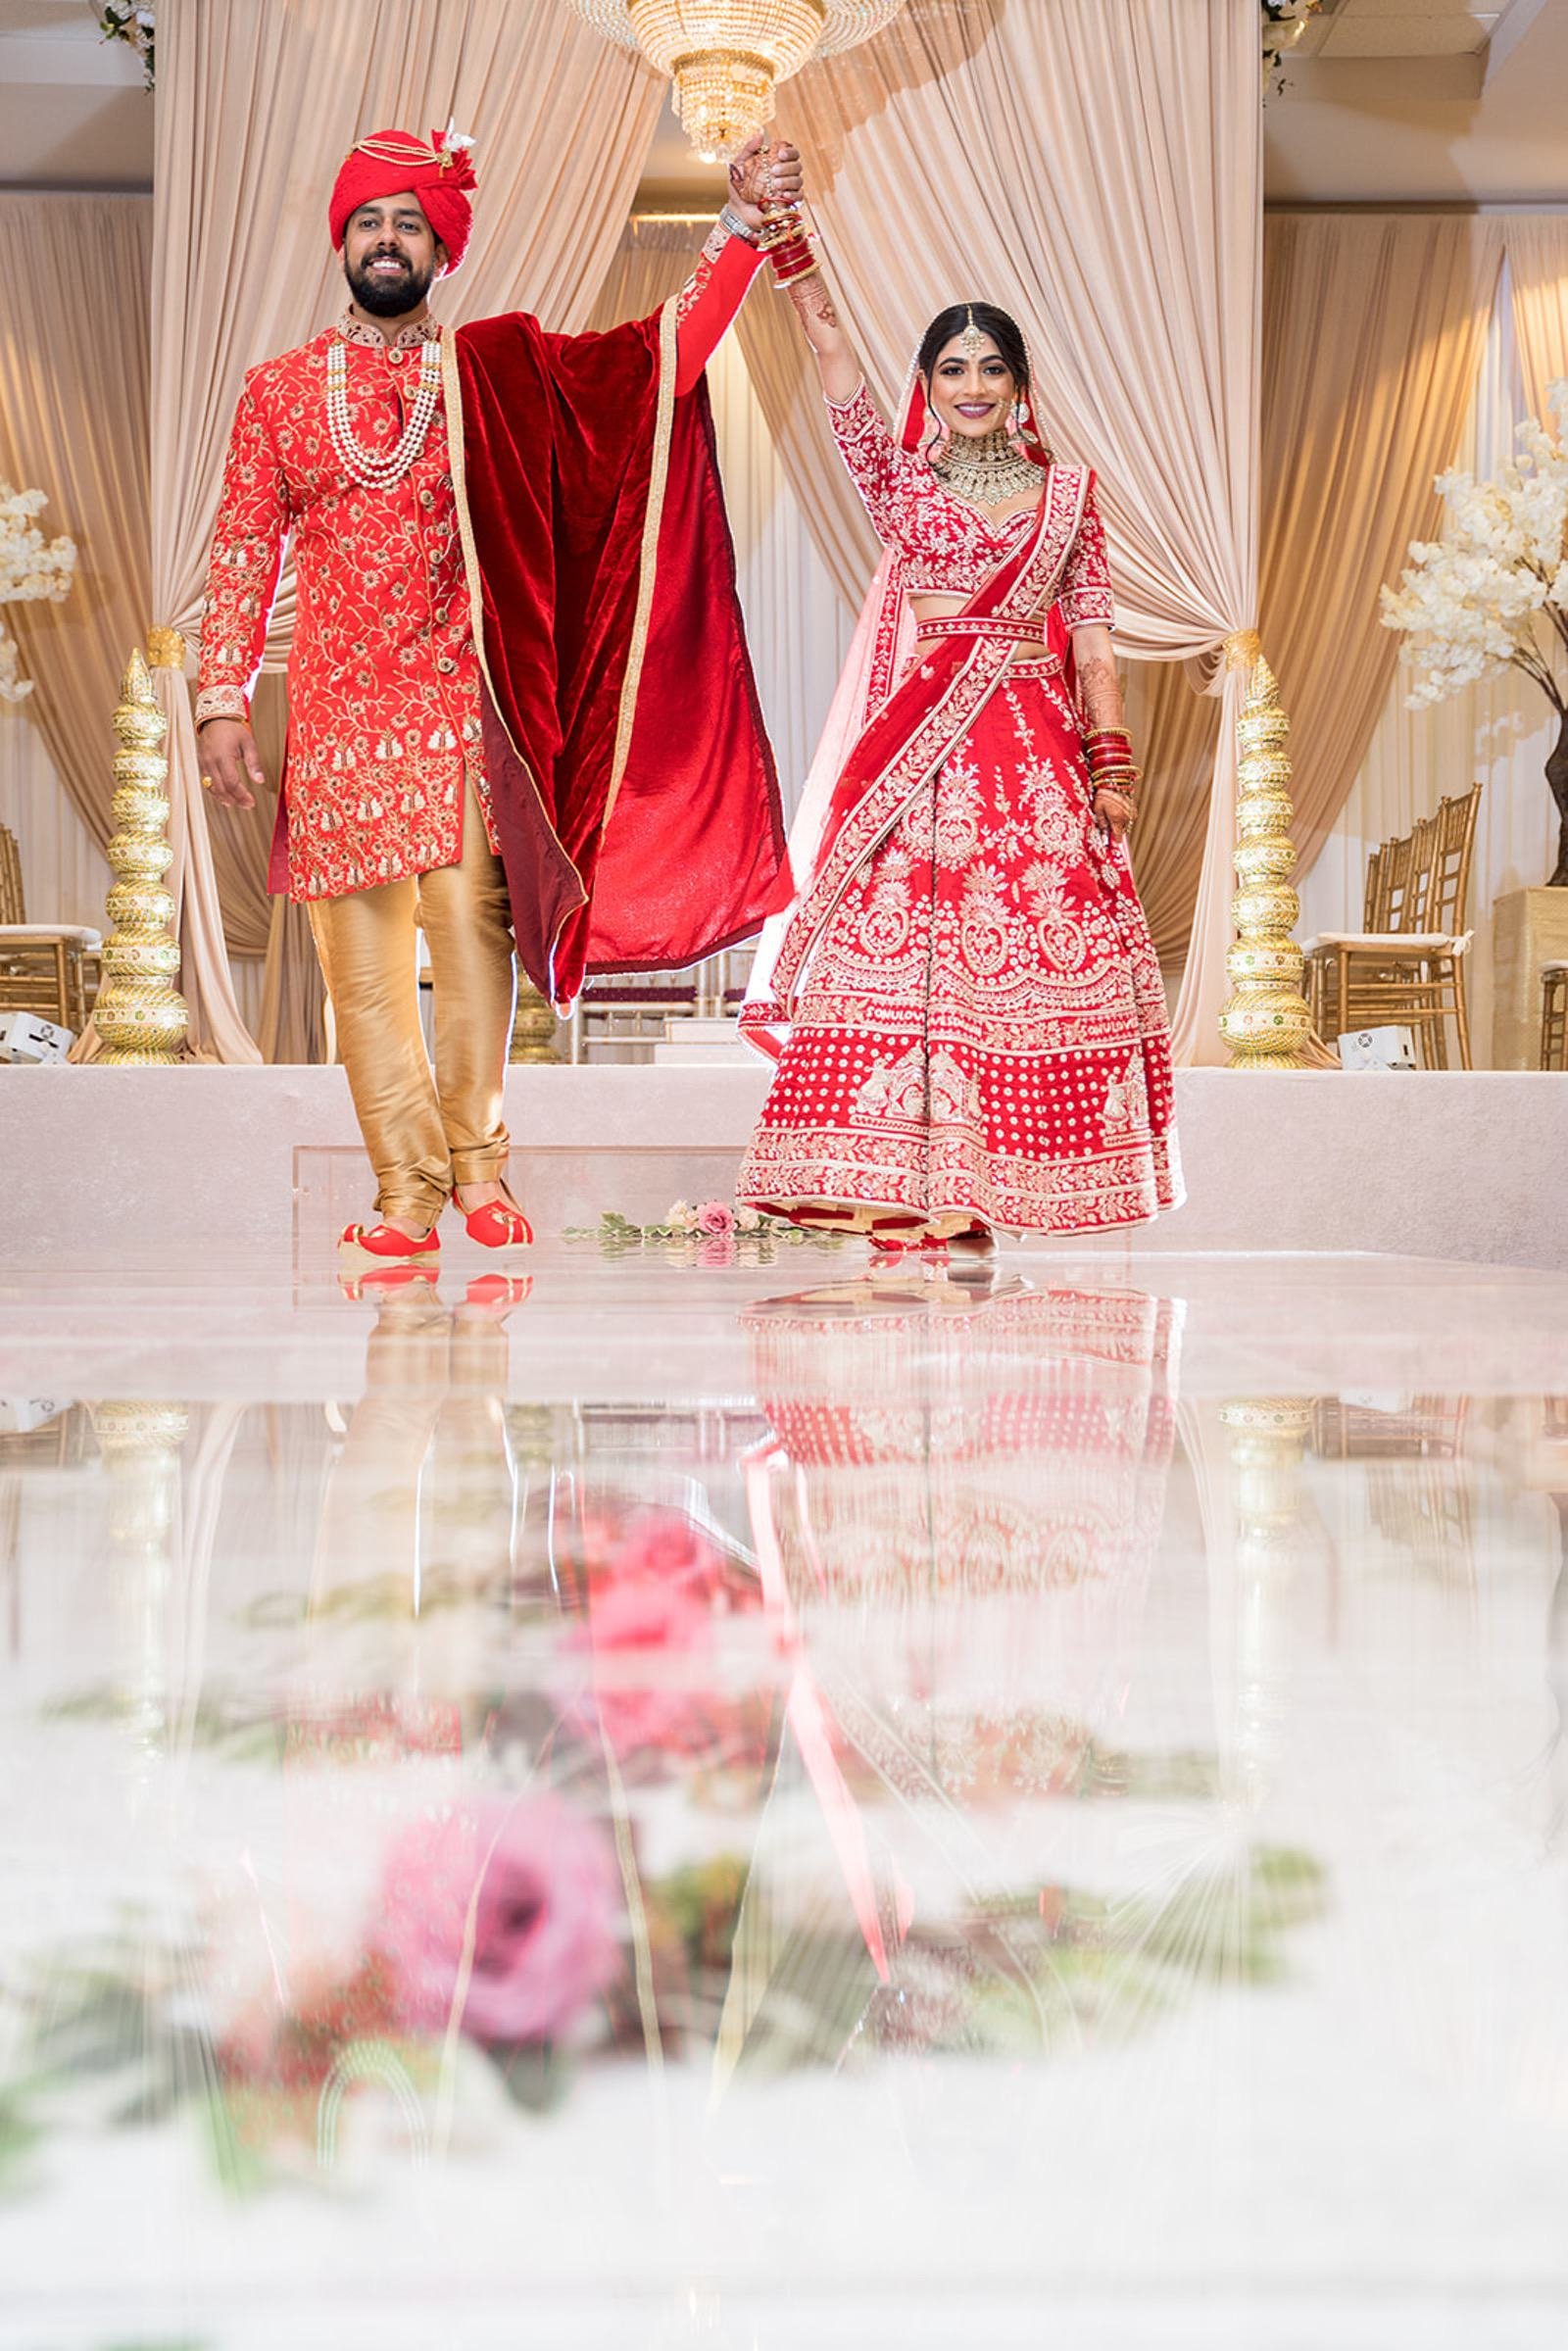 LCW - Chicago South Asian Weddings - Sonu and Daman - Portraits Ceremony-16.jpg